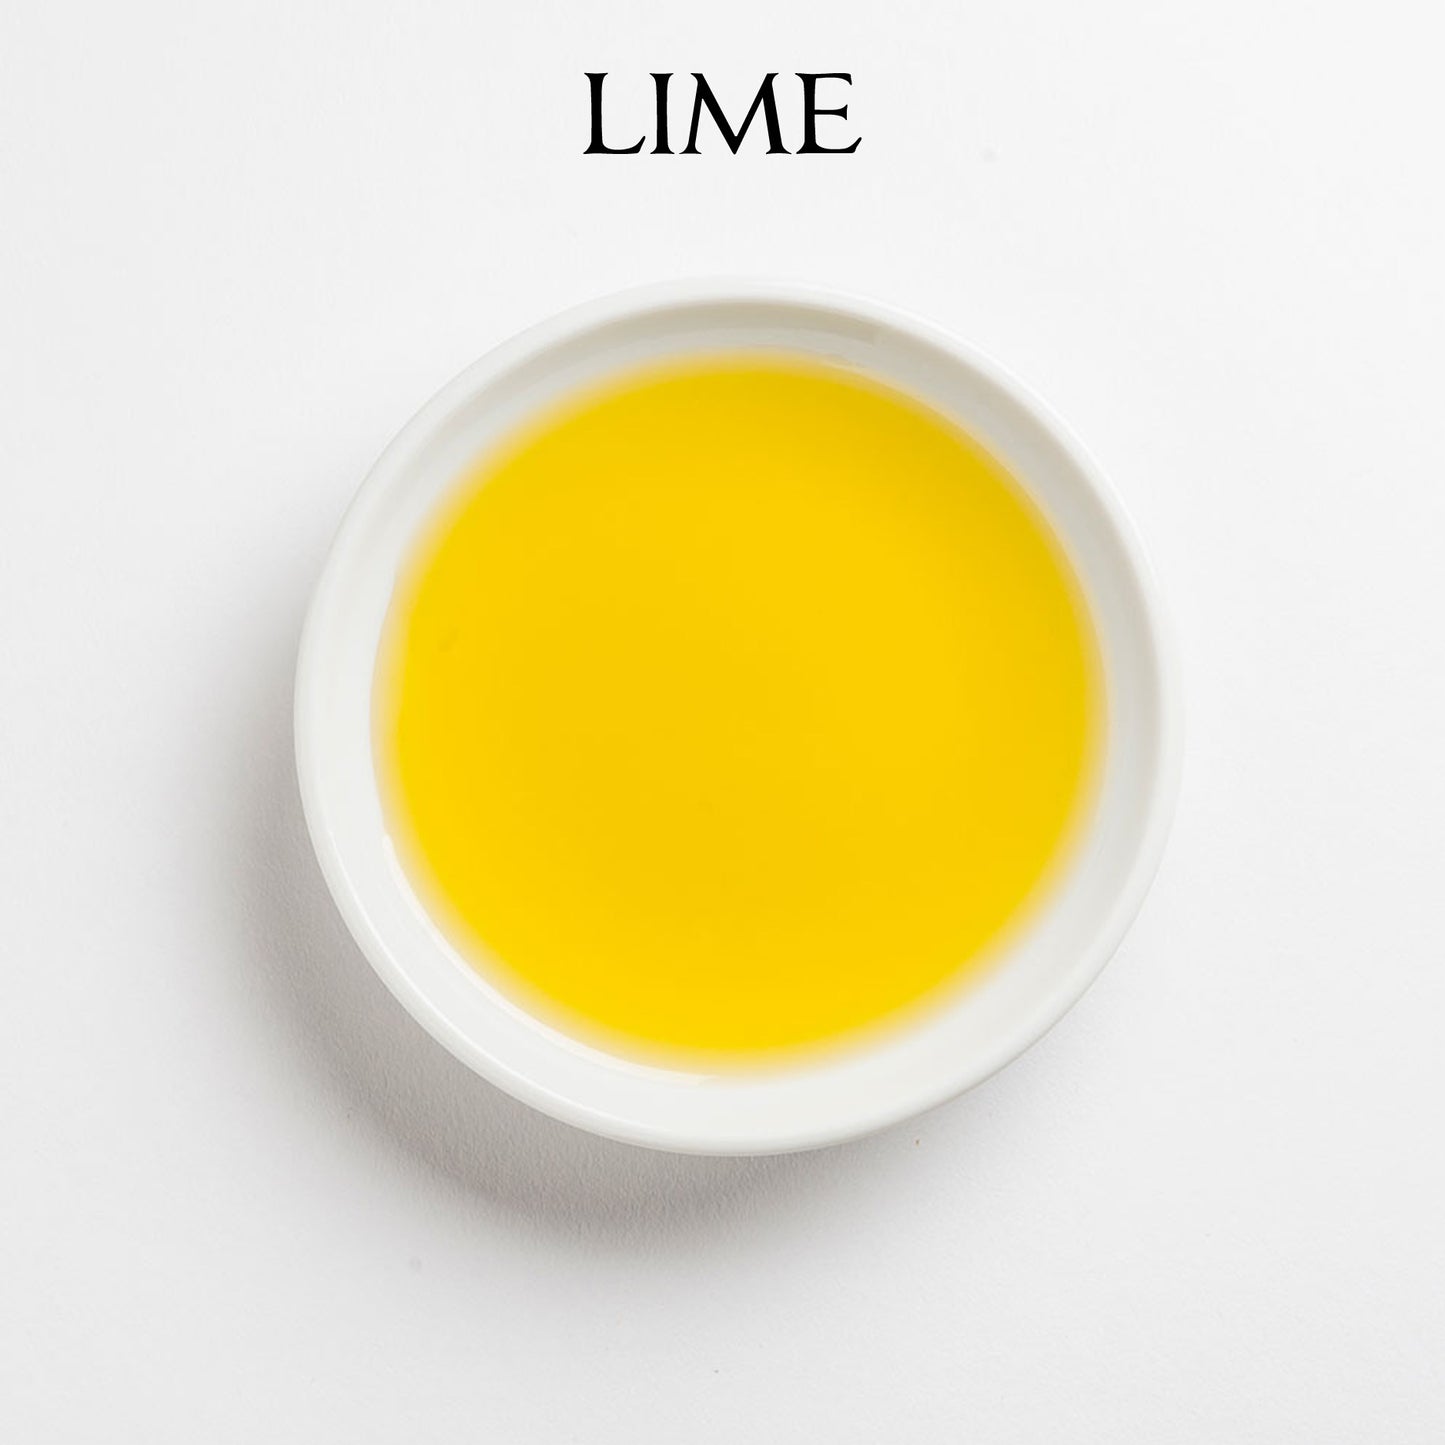 LIME Infused Olive Oil - California